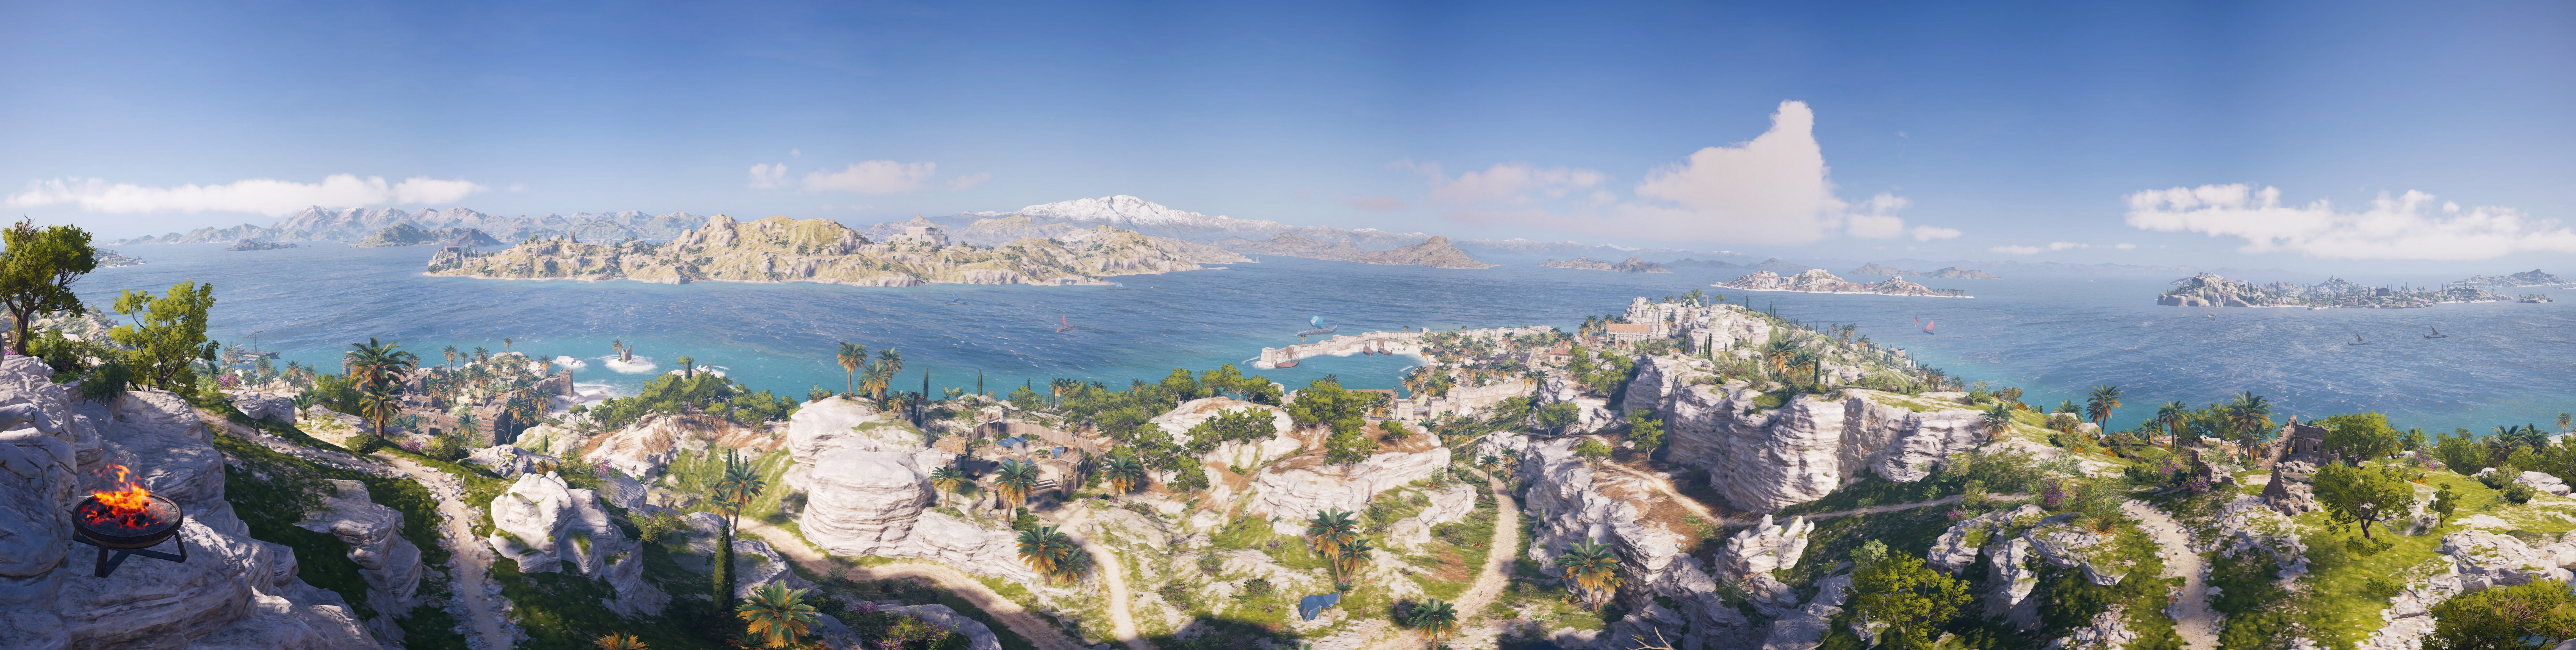 Assassin's Creed Odyssey Picture by RealPitchers